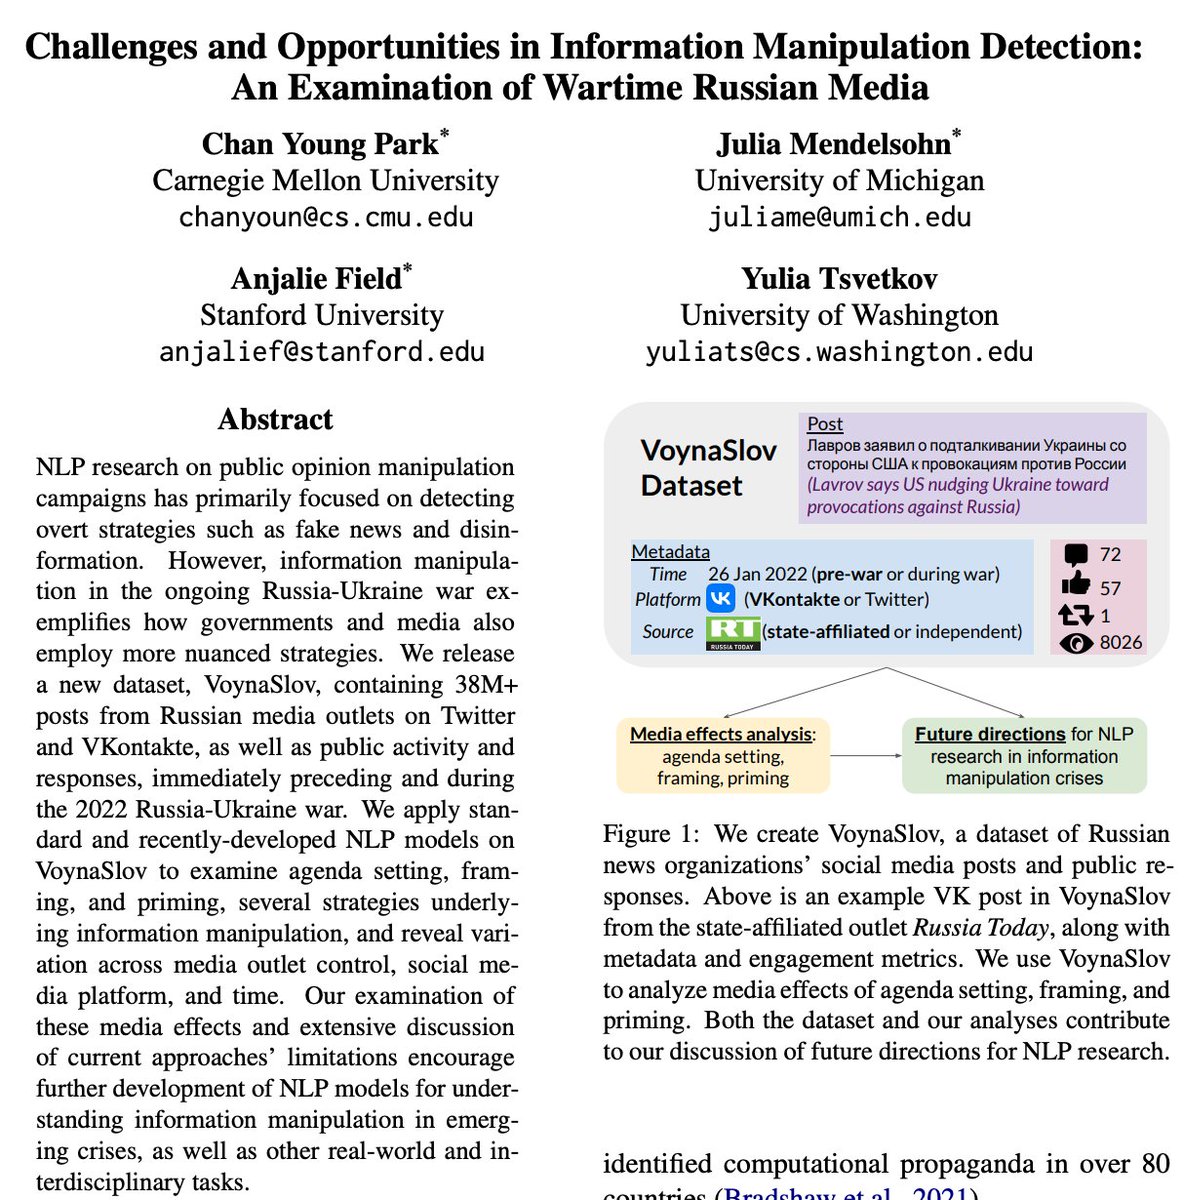 Our #EMNLP Findings paper is out! We release data of Russian media activity on Twitter & VK, analyze framing, priming, and agenda-setting, and highlight challenges in detecting info manipulation in ongoing crises. w/ @chan_young_park @anjalie_f @tsvetshop arxiv.org/abs/2205.12382